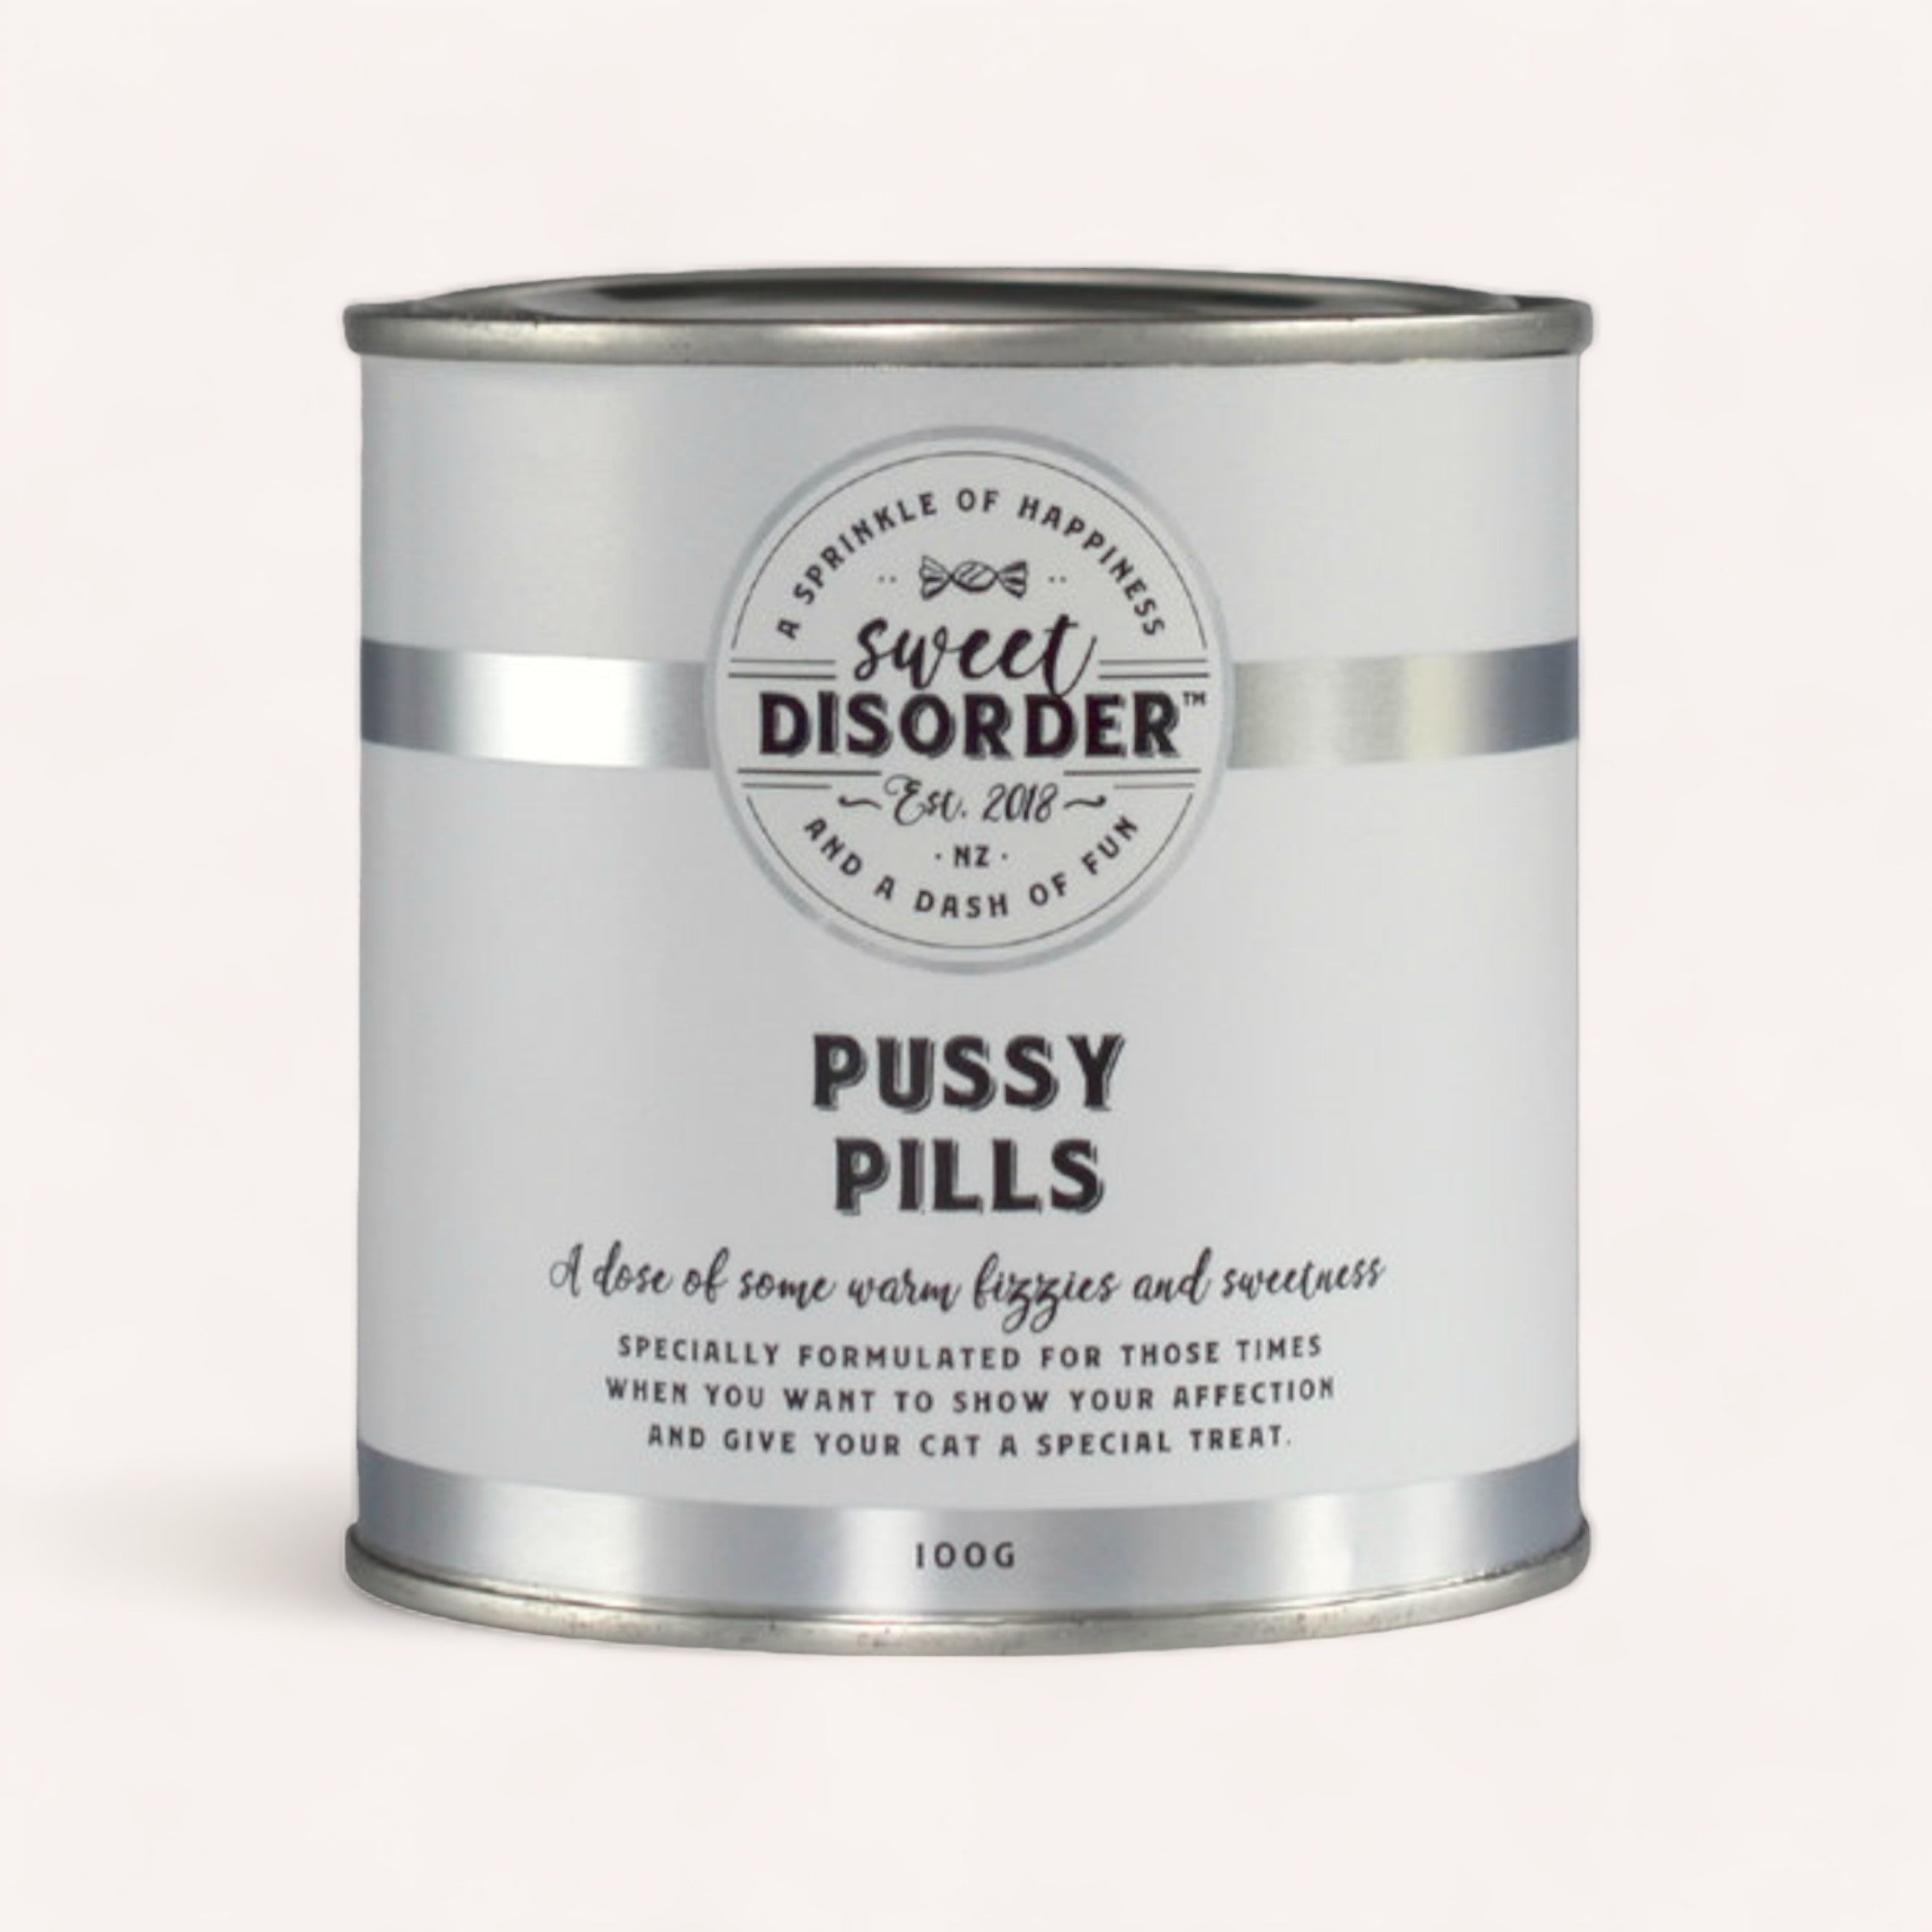 A cylindrical tin labeled "Pussy Pills Cat Treats by Sweet Disorder" containing "a sprinkle of happiness, love, and feline arrogance" designed as a whimsical gift product for cat owners.